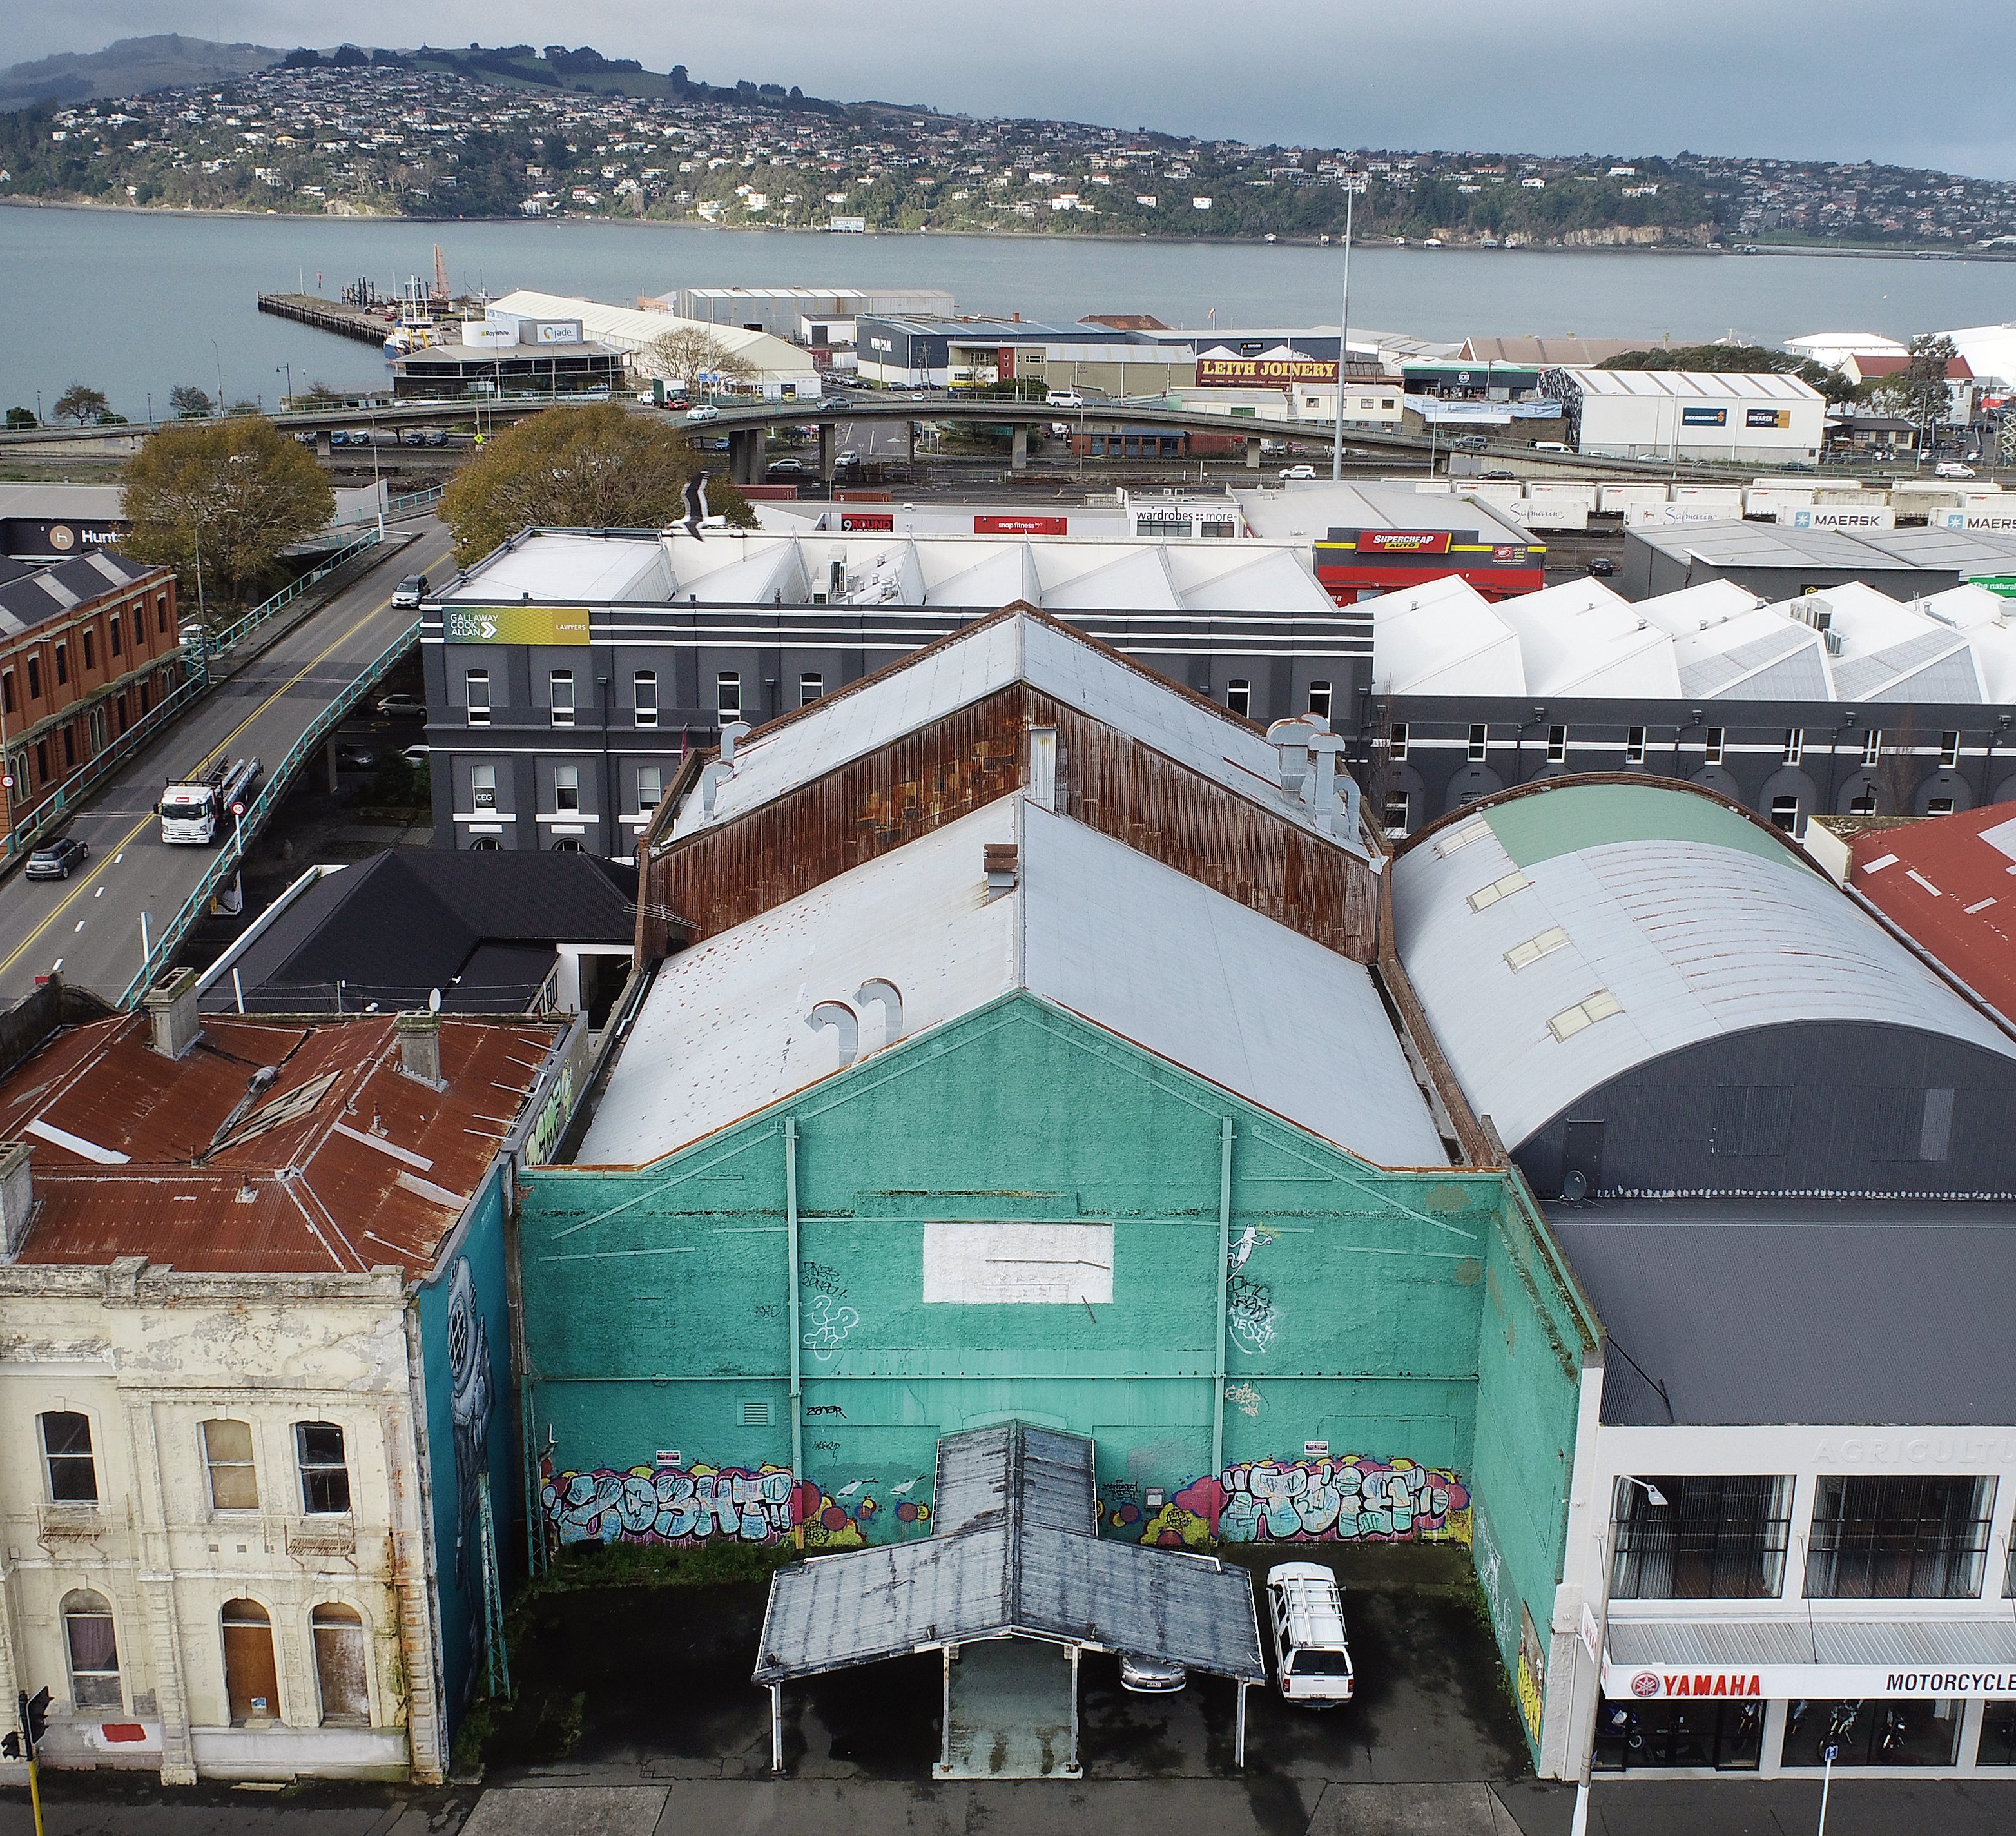 The former music venue Sammy’s is owned by the Dunedin City Council. PHOTO: STEPHEN JAQUIERY